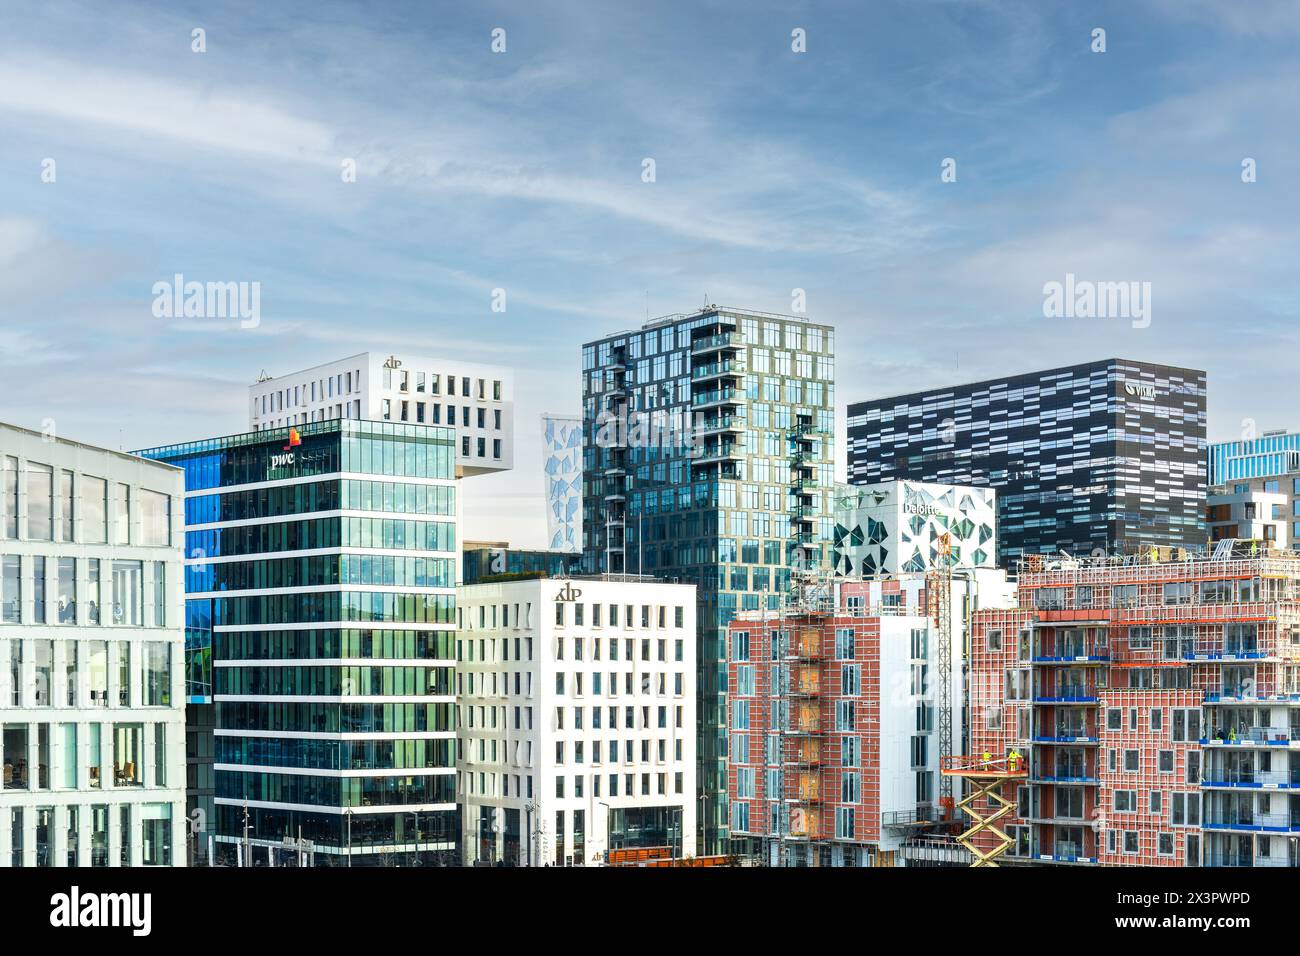 The Barcode District in Oslo, Norway Stock Photo